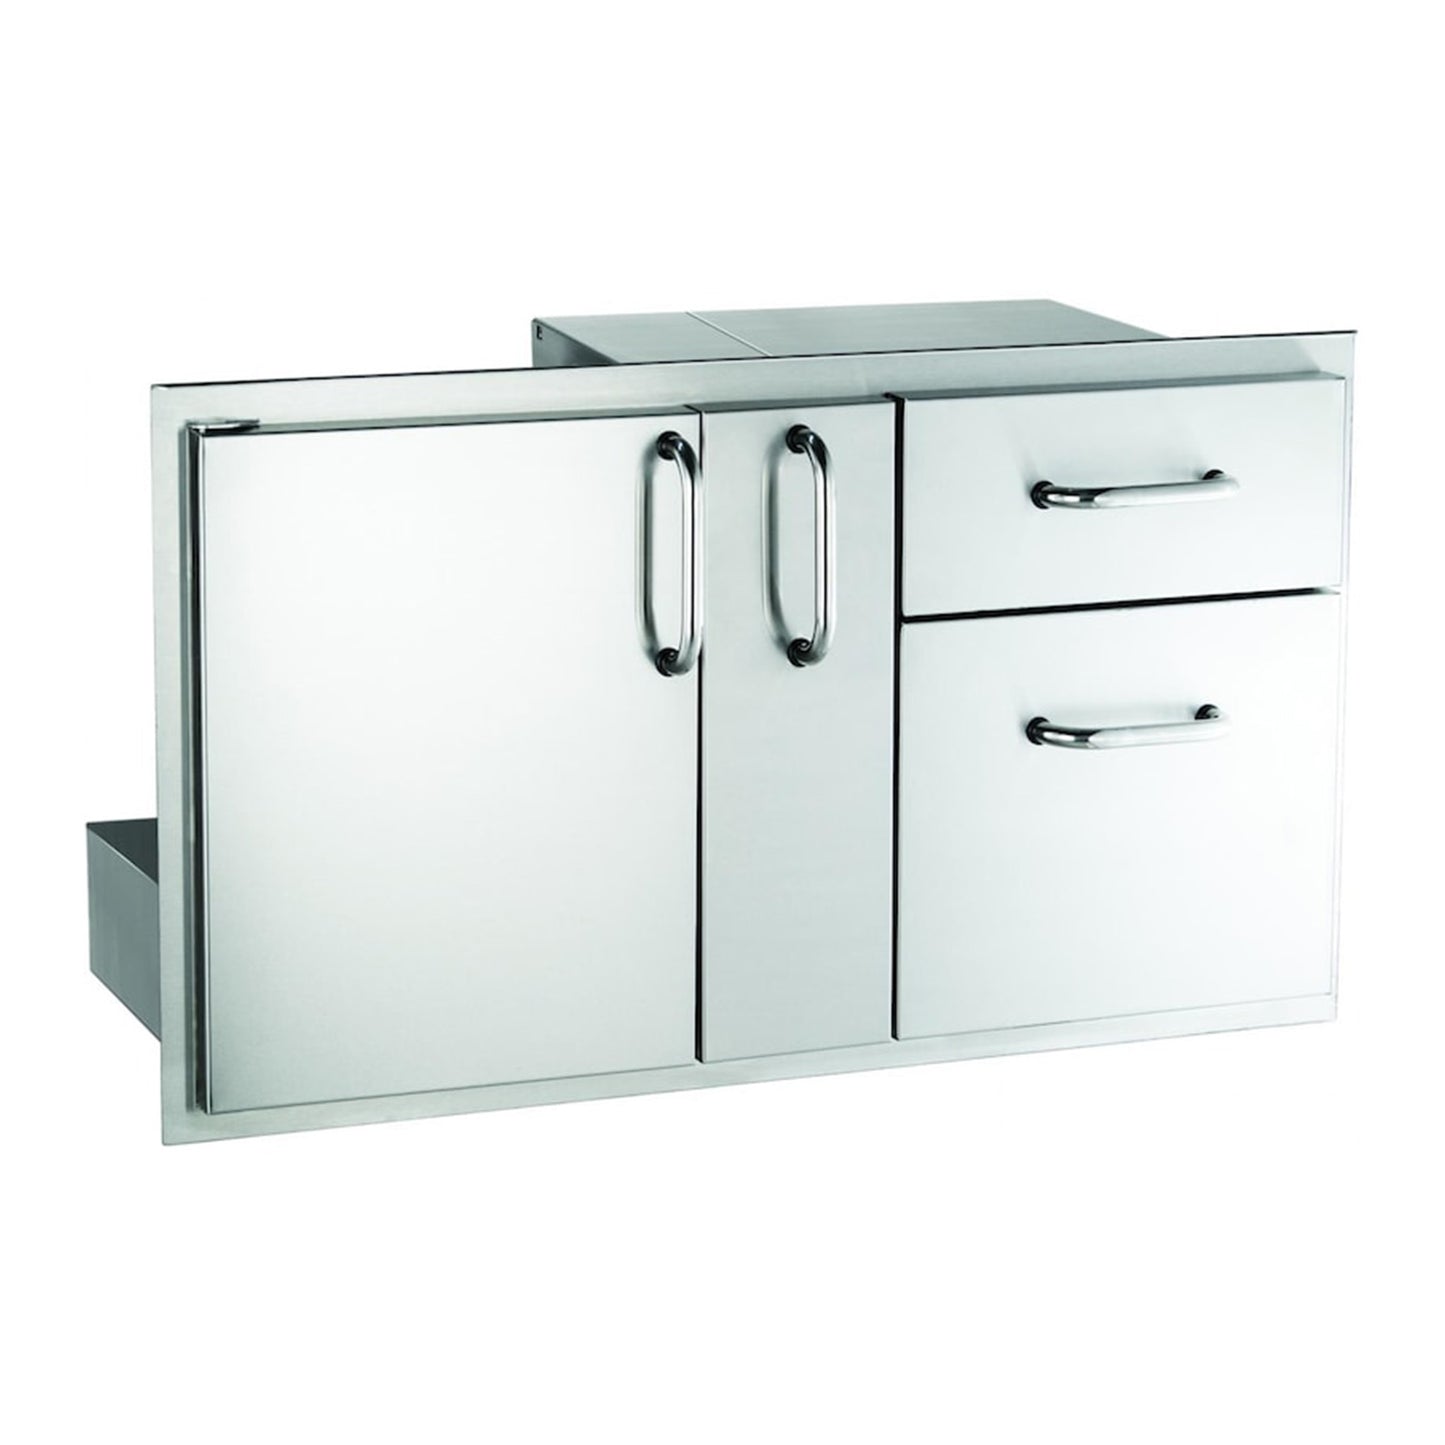 AOG Single Access Door, Double Drawer, and Plate Storage Unit